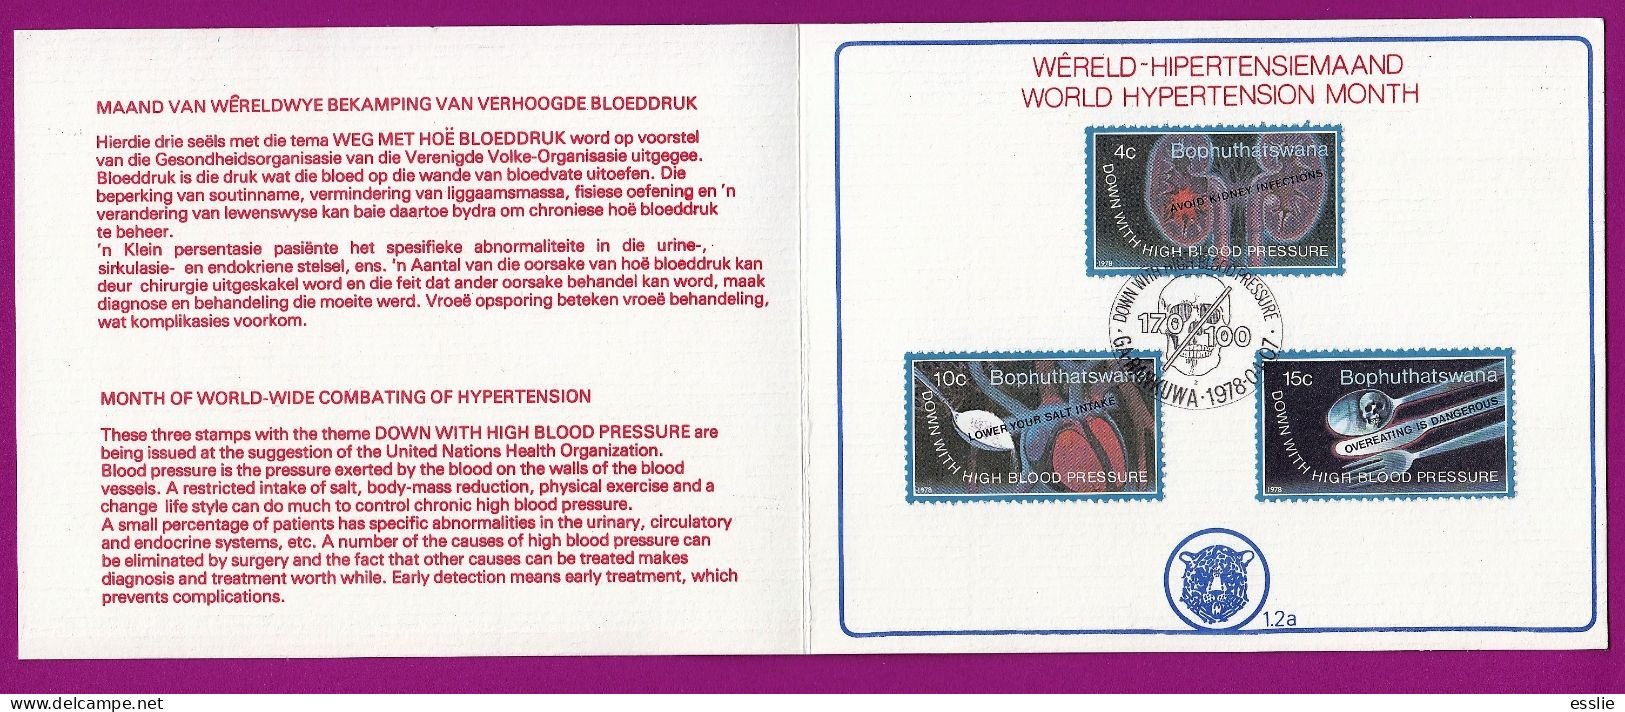 Bophuthatswana - 1978 - World Hypertension Month High Blood Pressure - First Day Collectors Small Card - Bophuthatswana